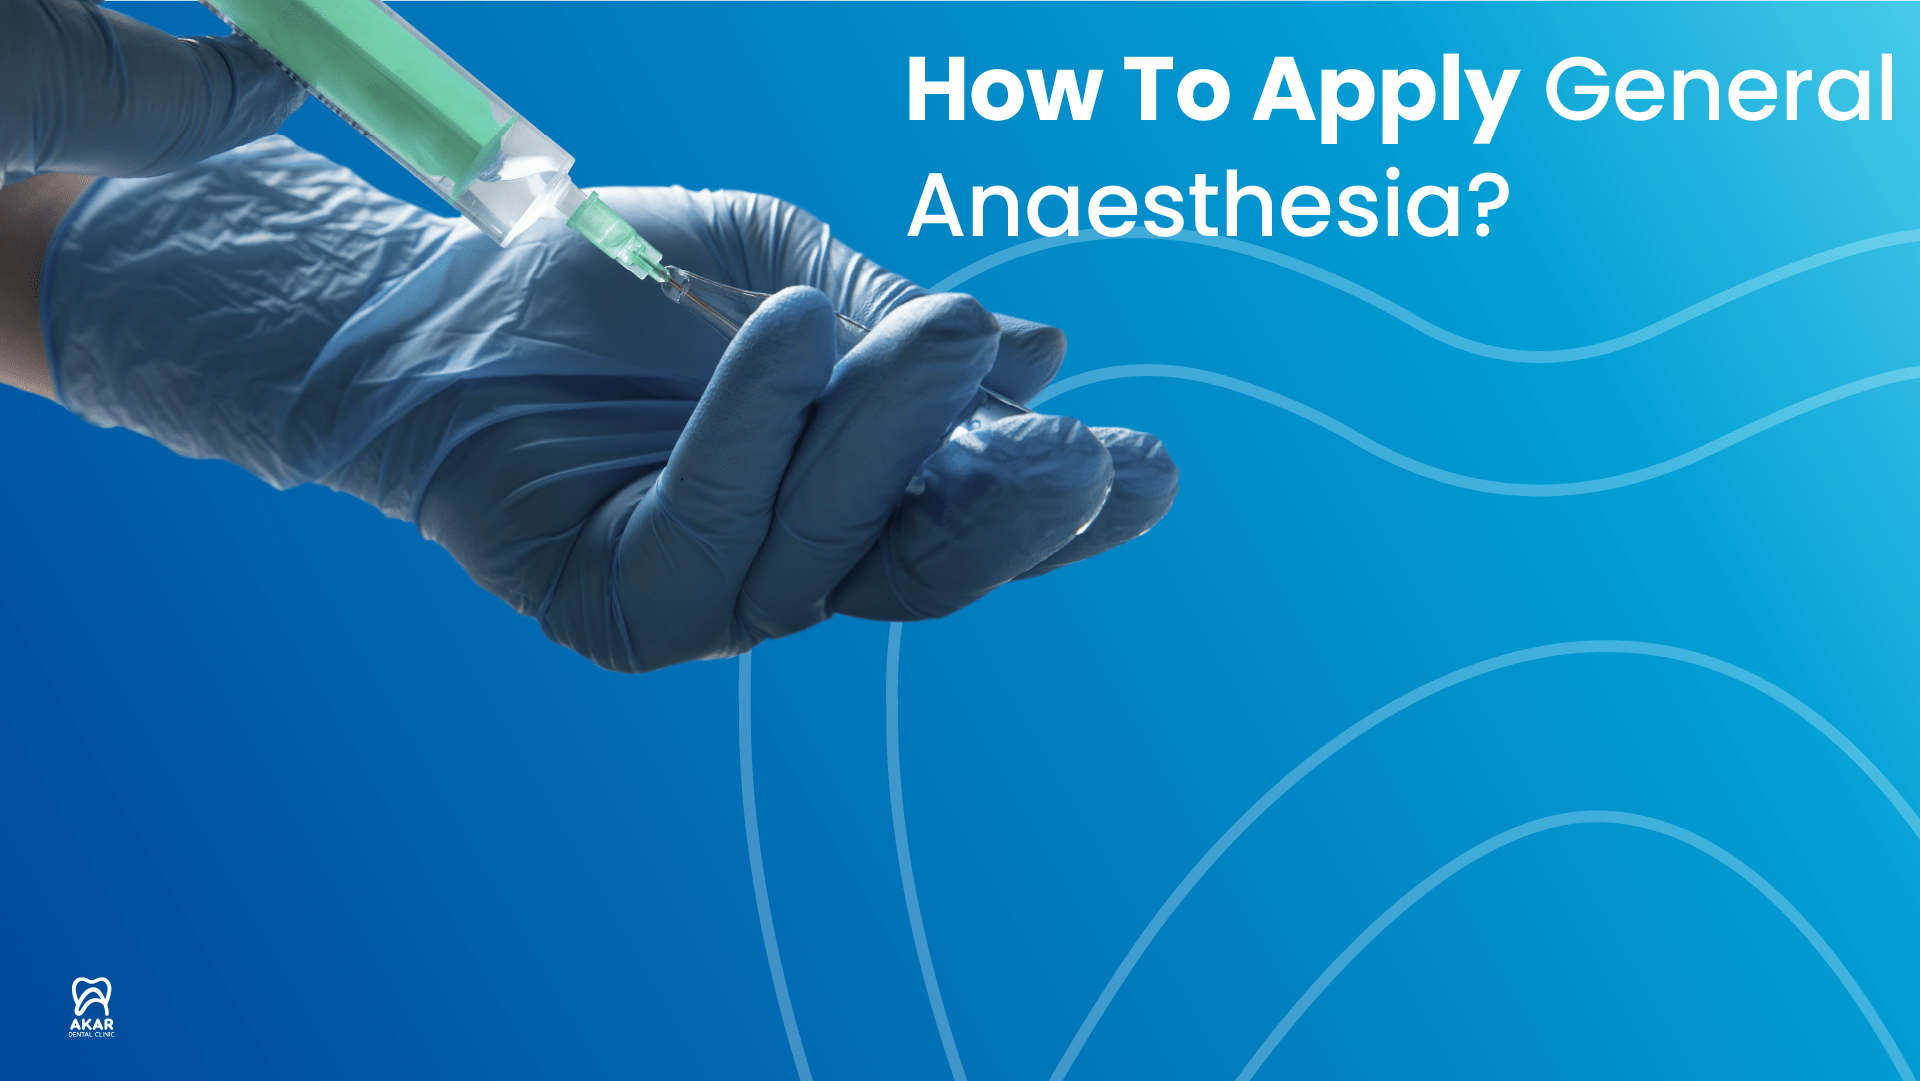 How To Apply General Anesthesia?